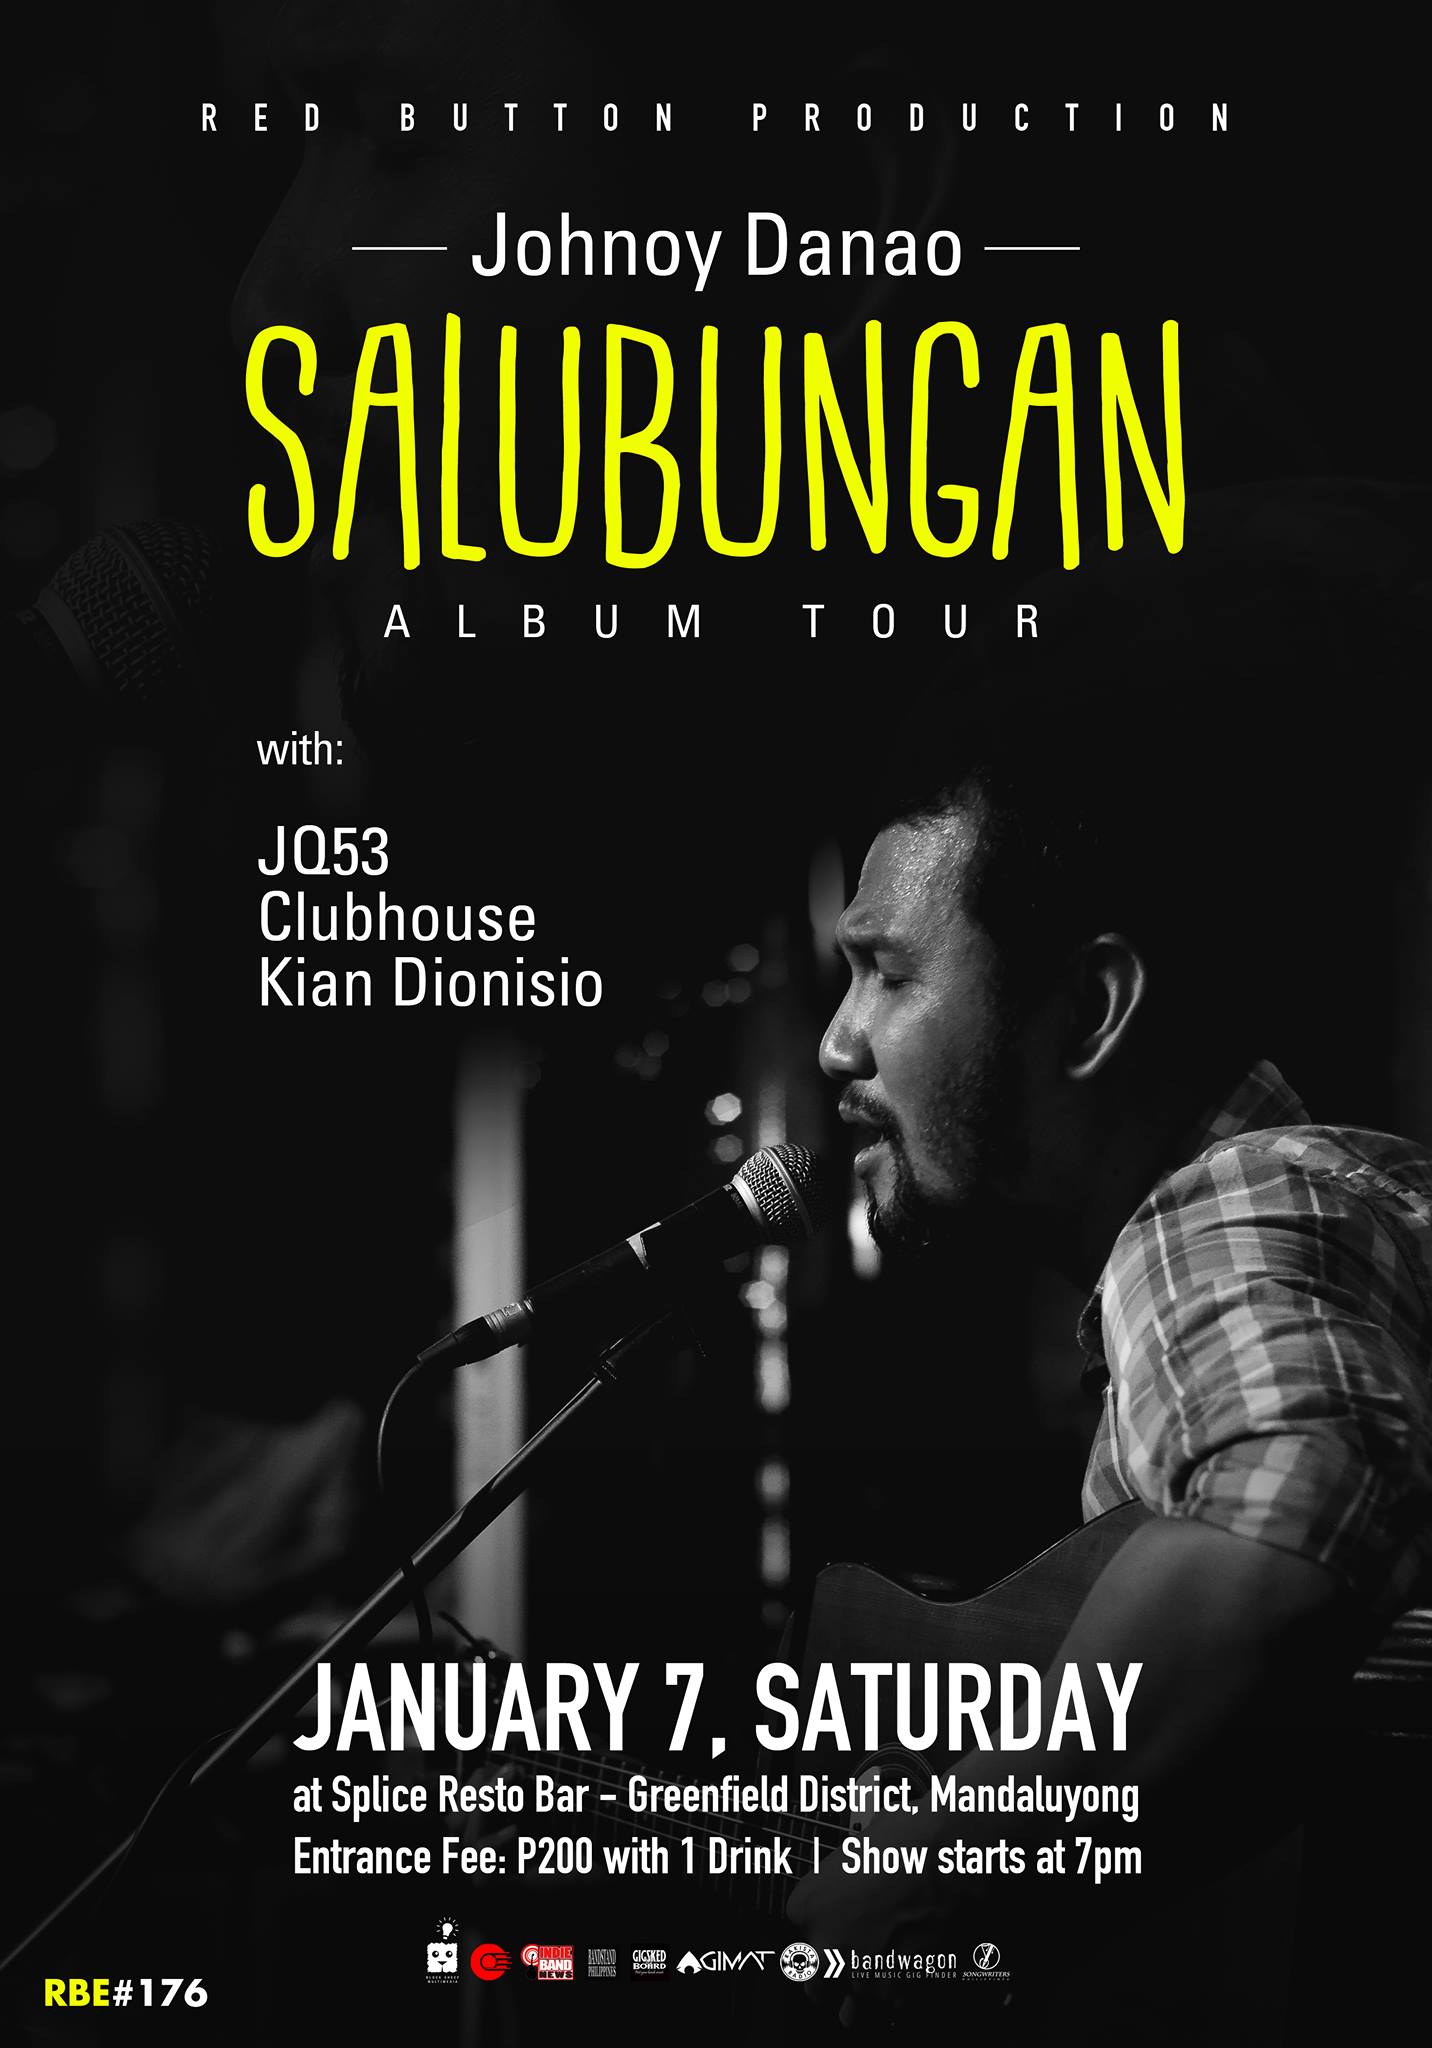 Red Button Production Page Liked · 34 mins · Red Button Production present RBEvent#176: Johnoy Danay Album Tour January 7, Satruday | 7:00PM at Splice Resto Bar, Greenfield District, Mandaluyong Entrance Fee: P200 with 1 Beer performances by: JQ53 Clubhouse Kian Dionisio Event Invitation Link: https://www.facebook.com/events/1196666163754125/ — at Splice Resto Bar. ---- clock Saturday, January 7, 2017 at 7 PM - 11 PM Next Week · 24–31° Partly Cloudy pin Show Map Splice Resto Bar Greenfield District, 1552 Mandaluyong, Philippines feed-solid Subscribed to Red Button Production's events About Discussion Write Post Add Photo / Video Create Poll Details Red Button Production present RBEvent#176: Johnoy Danay Album Tour January 7, Satruday | 7:00PM at Splice Resto Bar, Greenfield District, Mandaluyong Entrance Fee: P200 with 1 Beer performances by: JQ53 Clubhouse Kian Dionisio